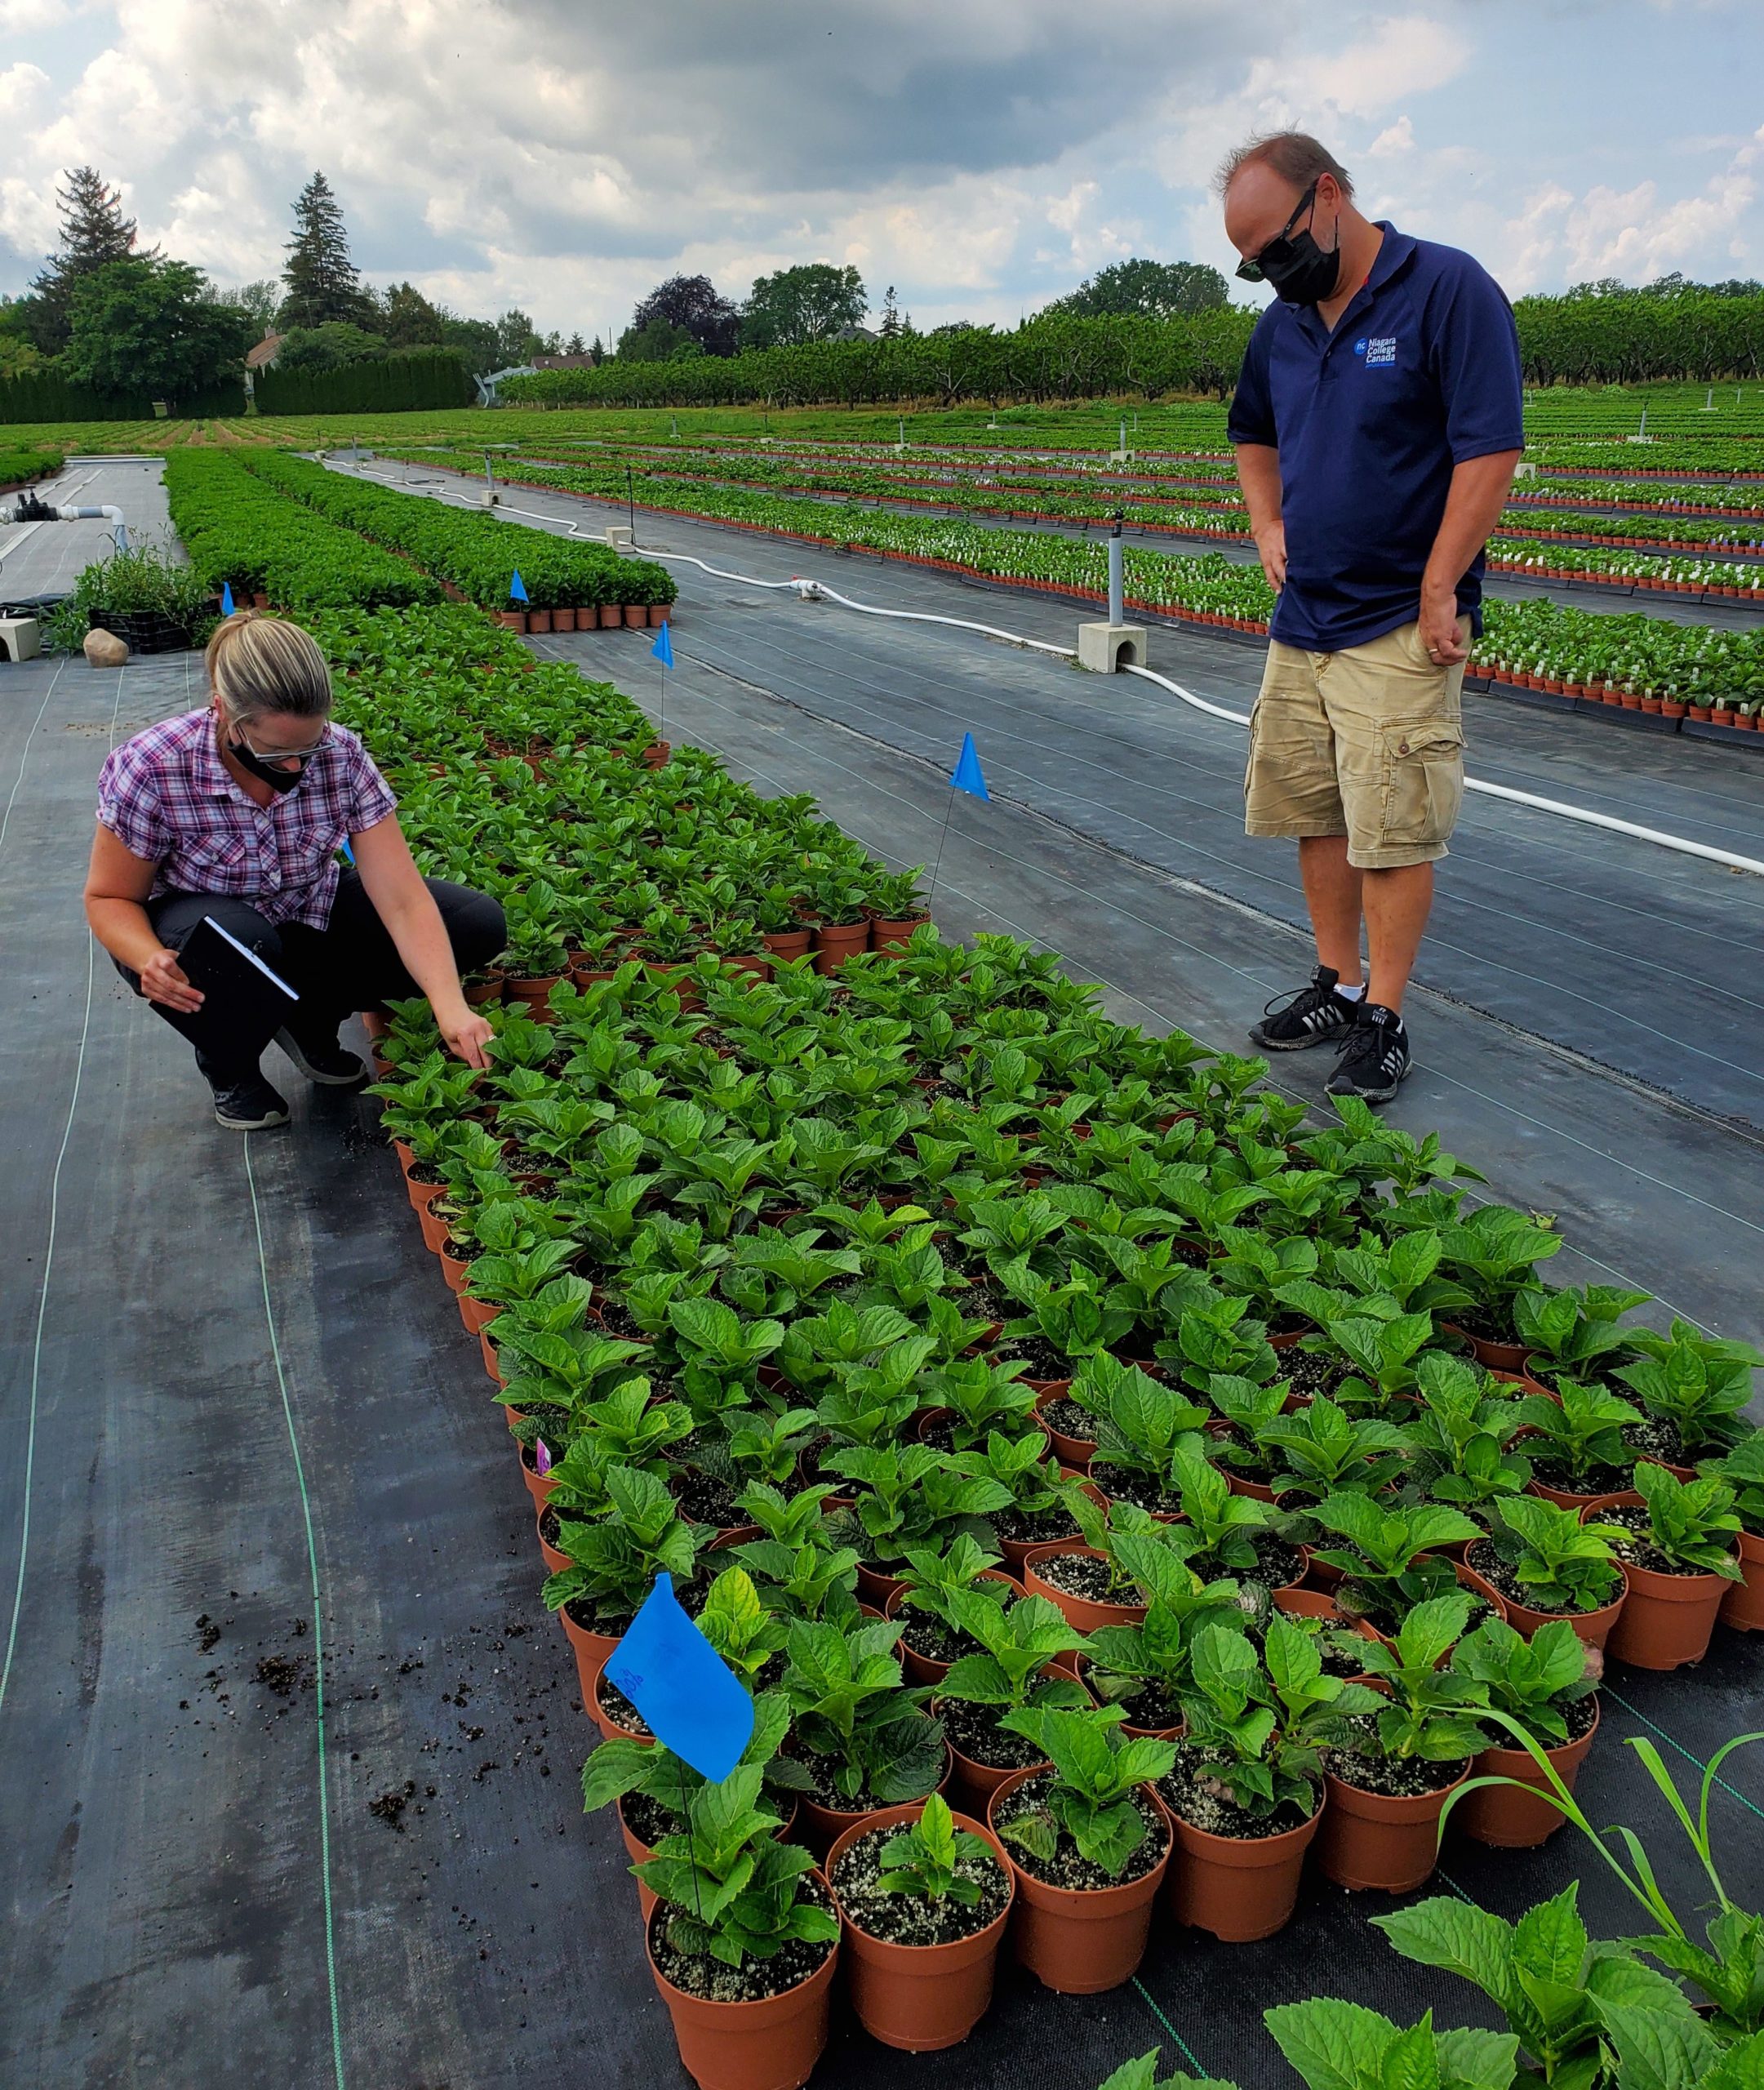 Researchers Christine George and Derek Schulze with HESIC are shown evaluating the performance of hydrangeas at Kamps Hydrangea farm in Vineland. These blue-flagged hydrangeas have been amended with varying levels of zeolite as part of a trial with International Zeolite Corp. currently in progress.